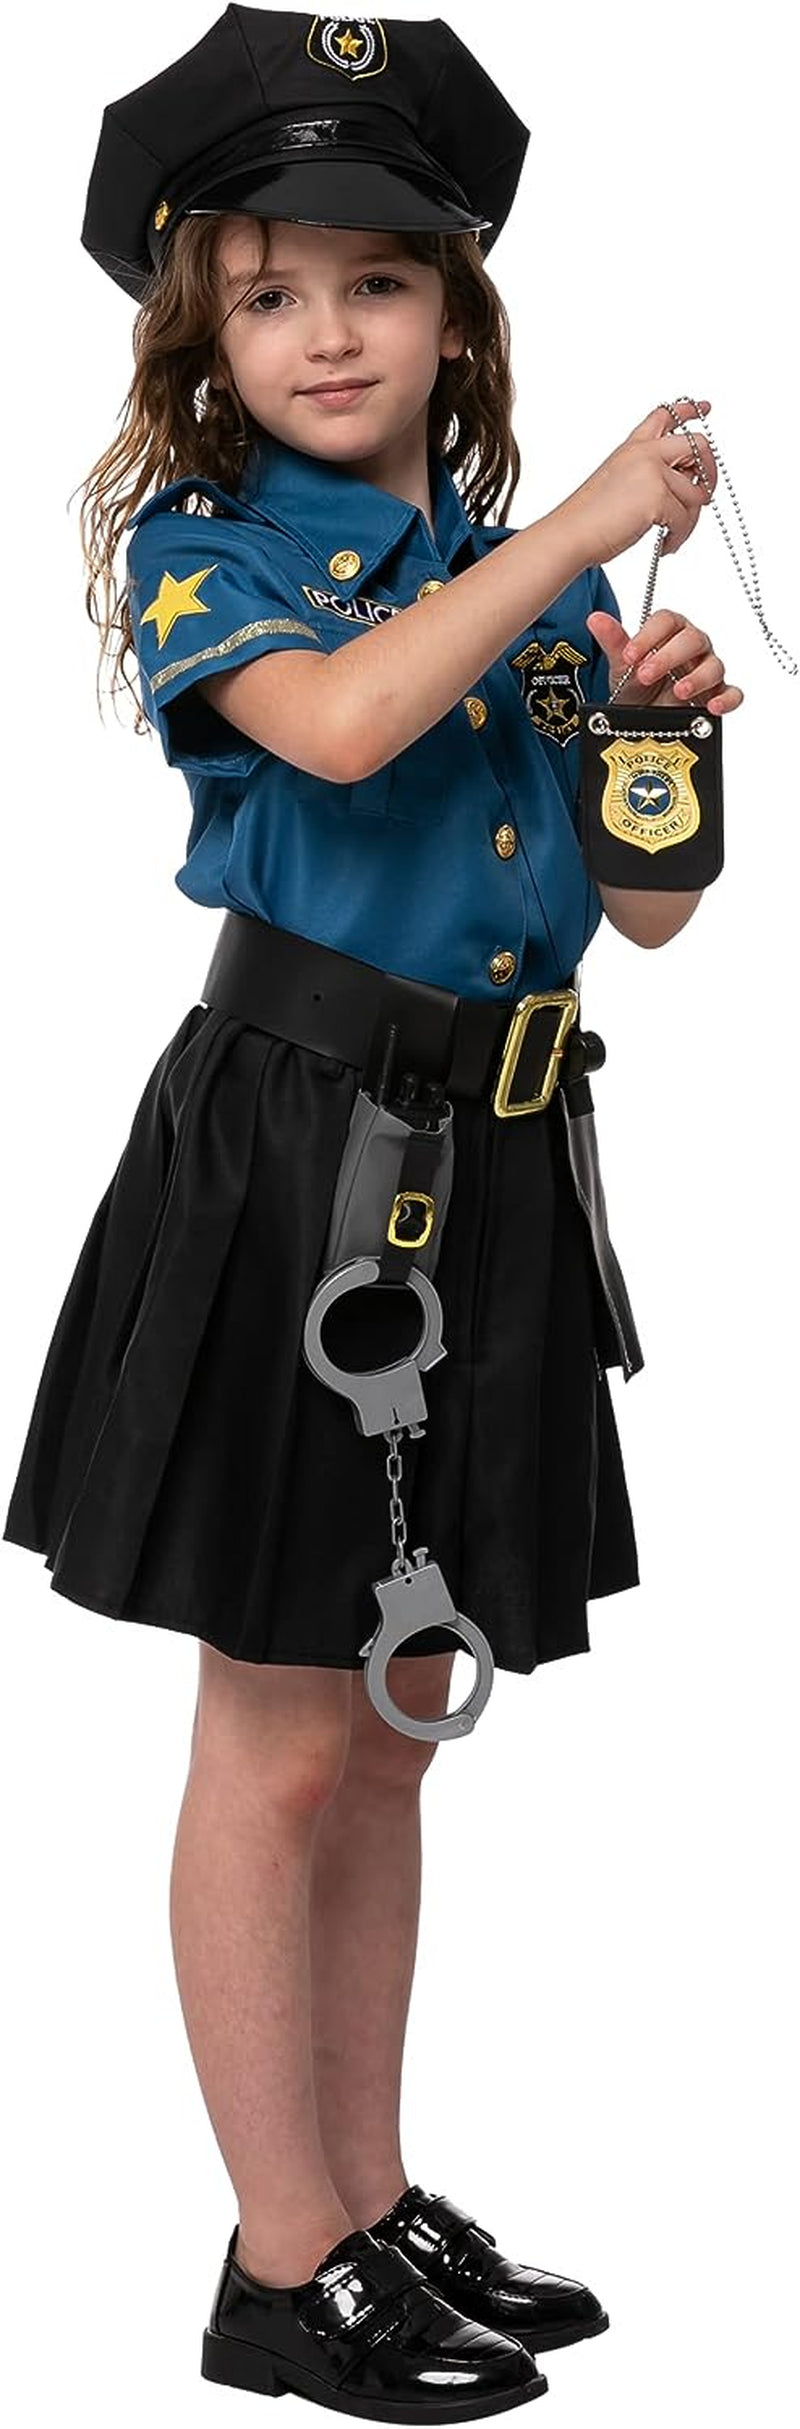 Spooktacular Creations Police Officer Costume for Kids in Light Blue Colour for Girls 3T to L  Spooktacular Creations   